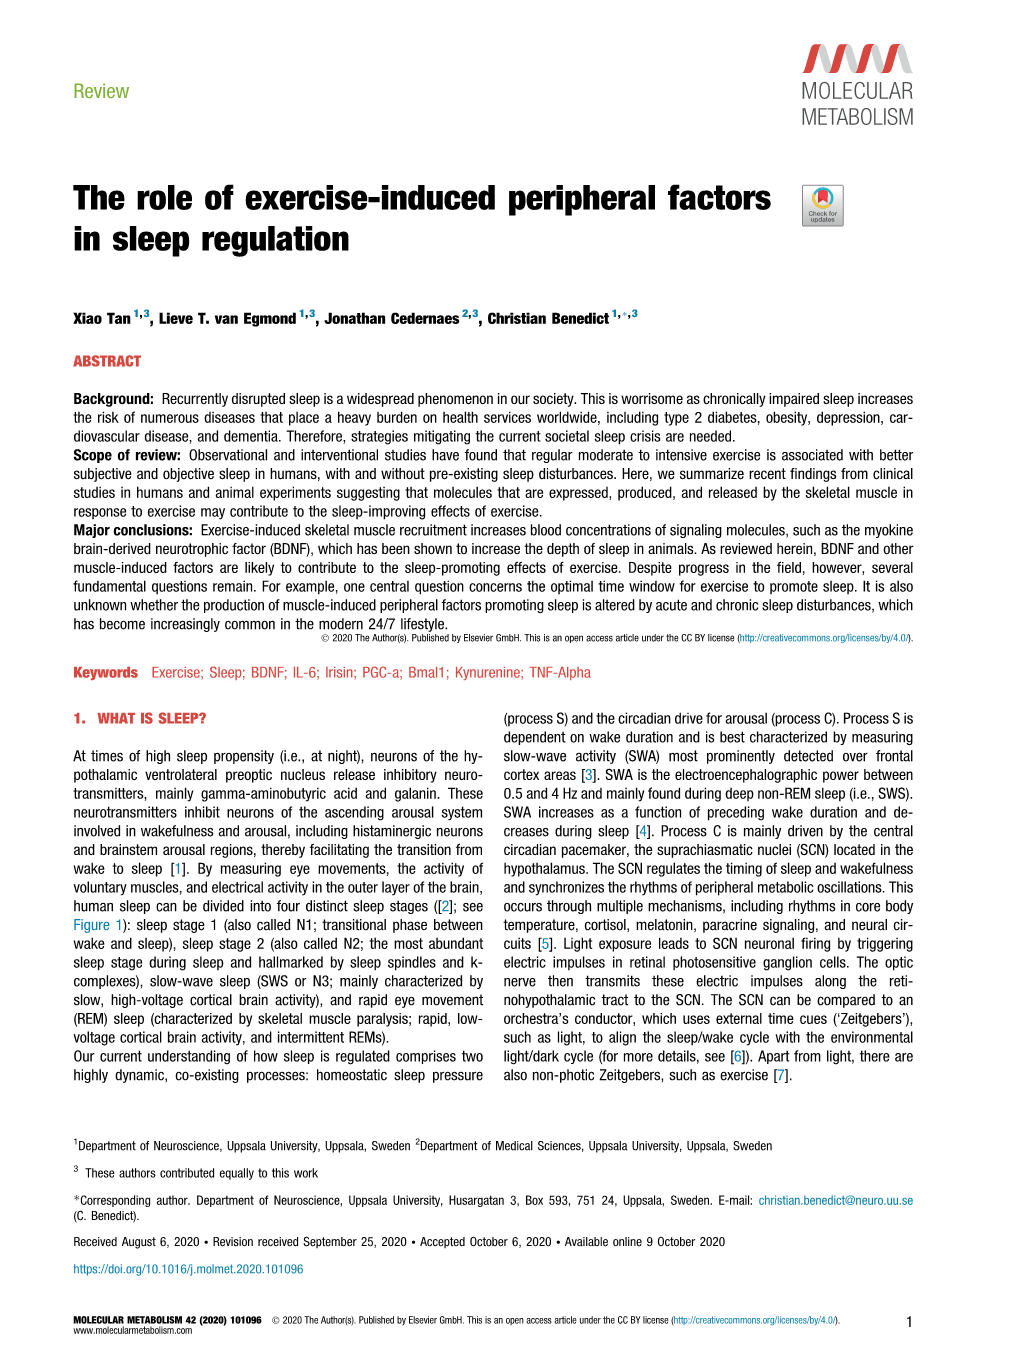 The Role of Exercise-Induced Peripheral Factors in Sleep Regulation